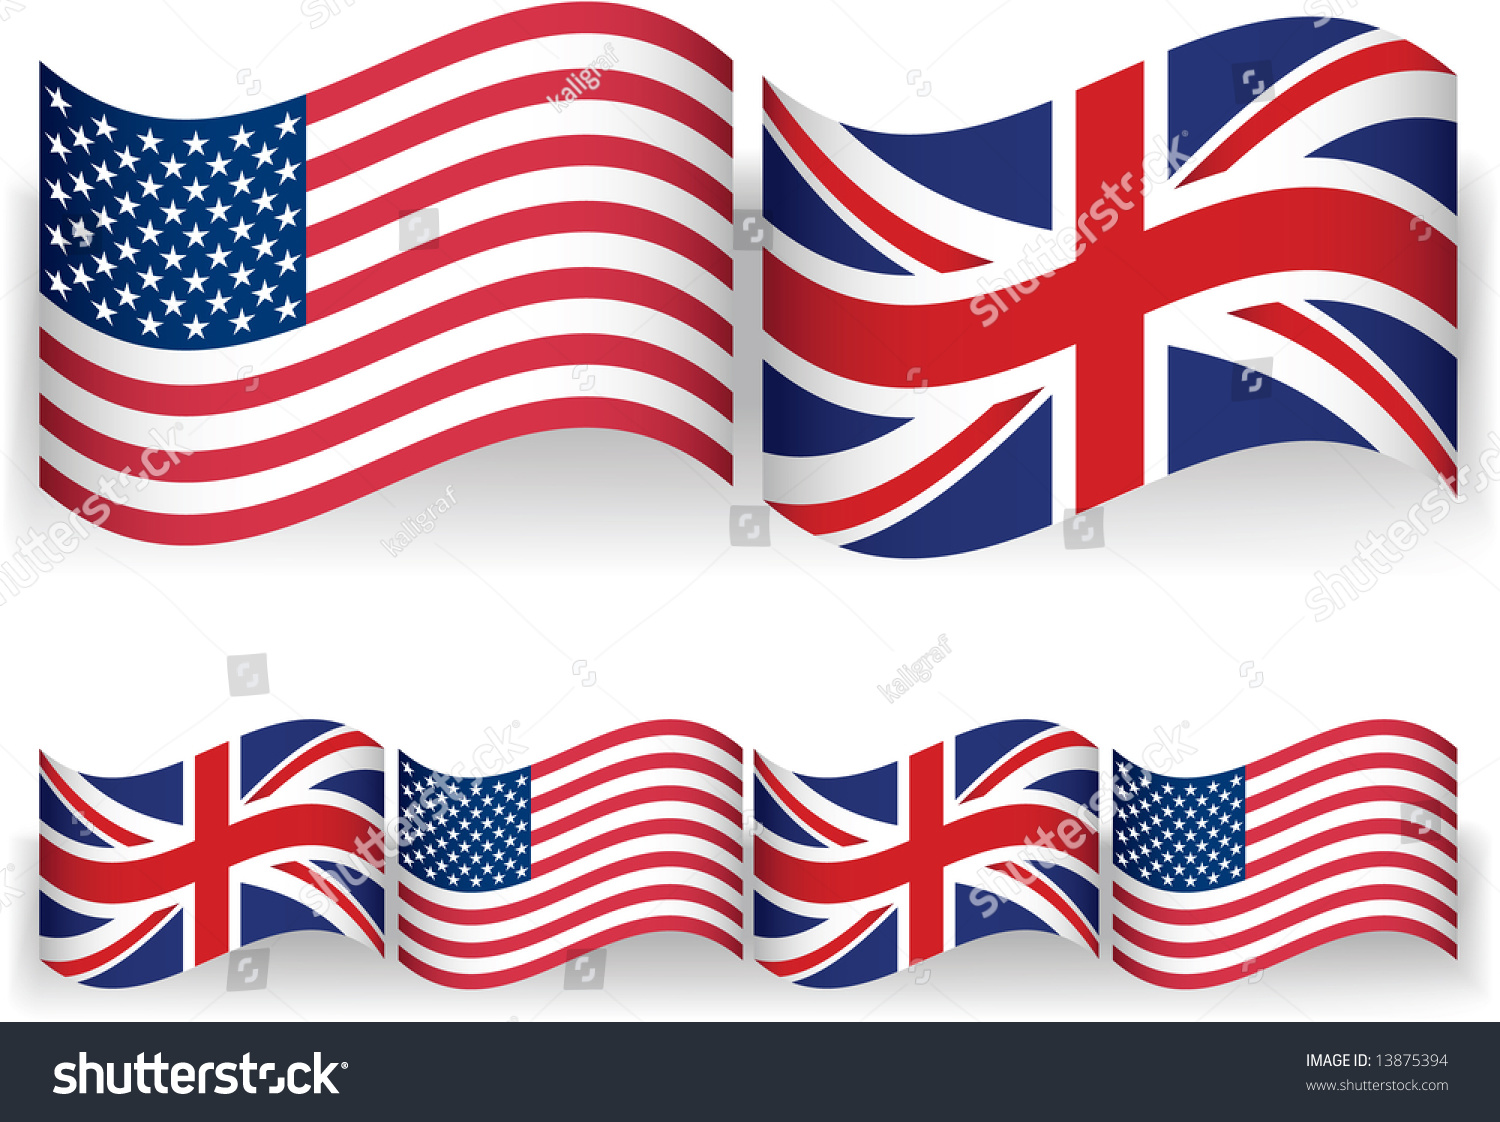 SVG of American British Flags svg